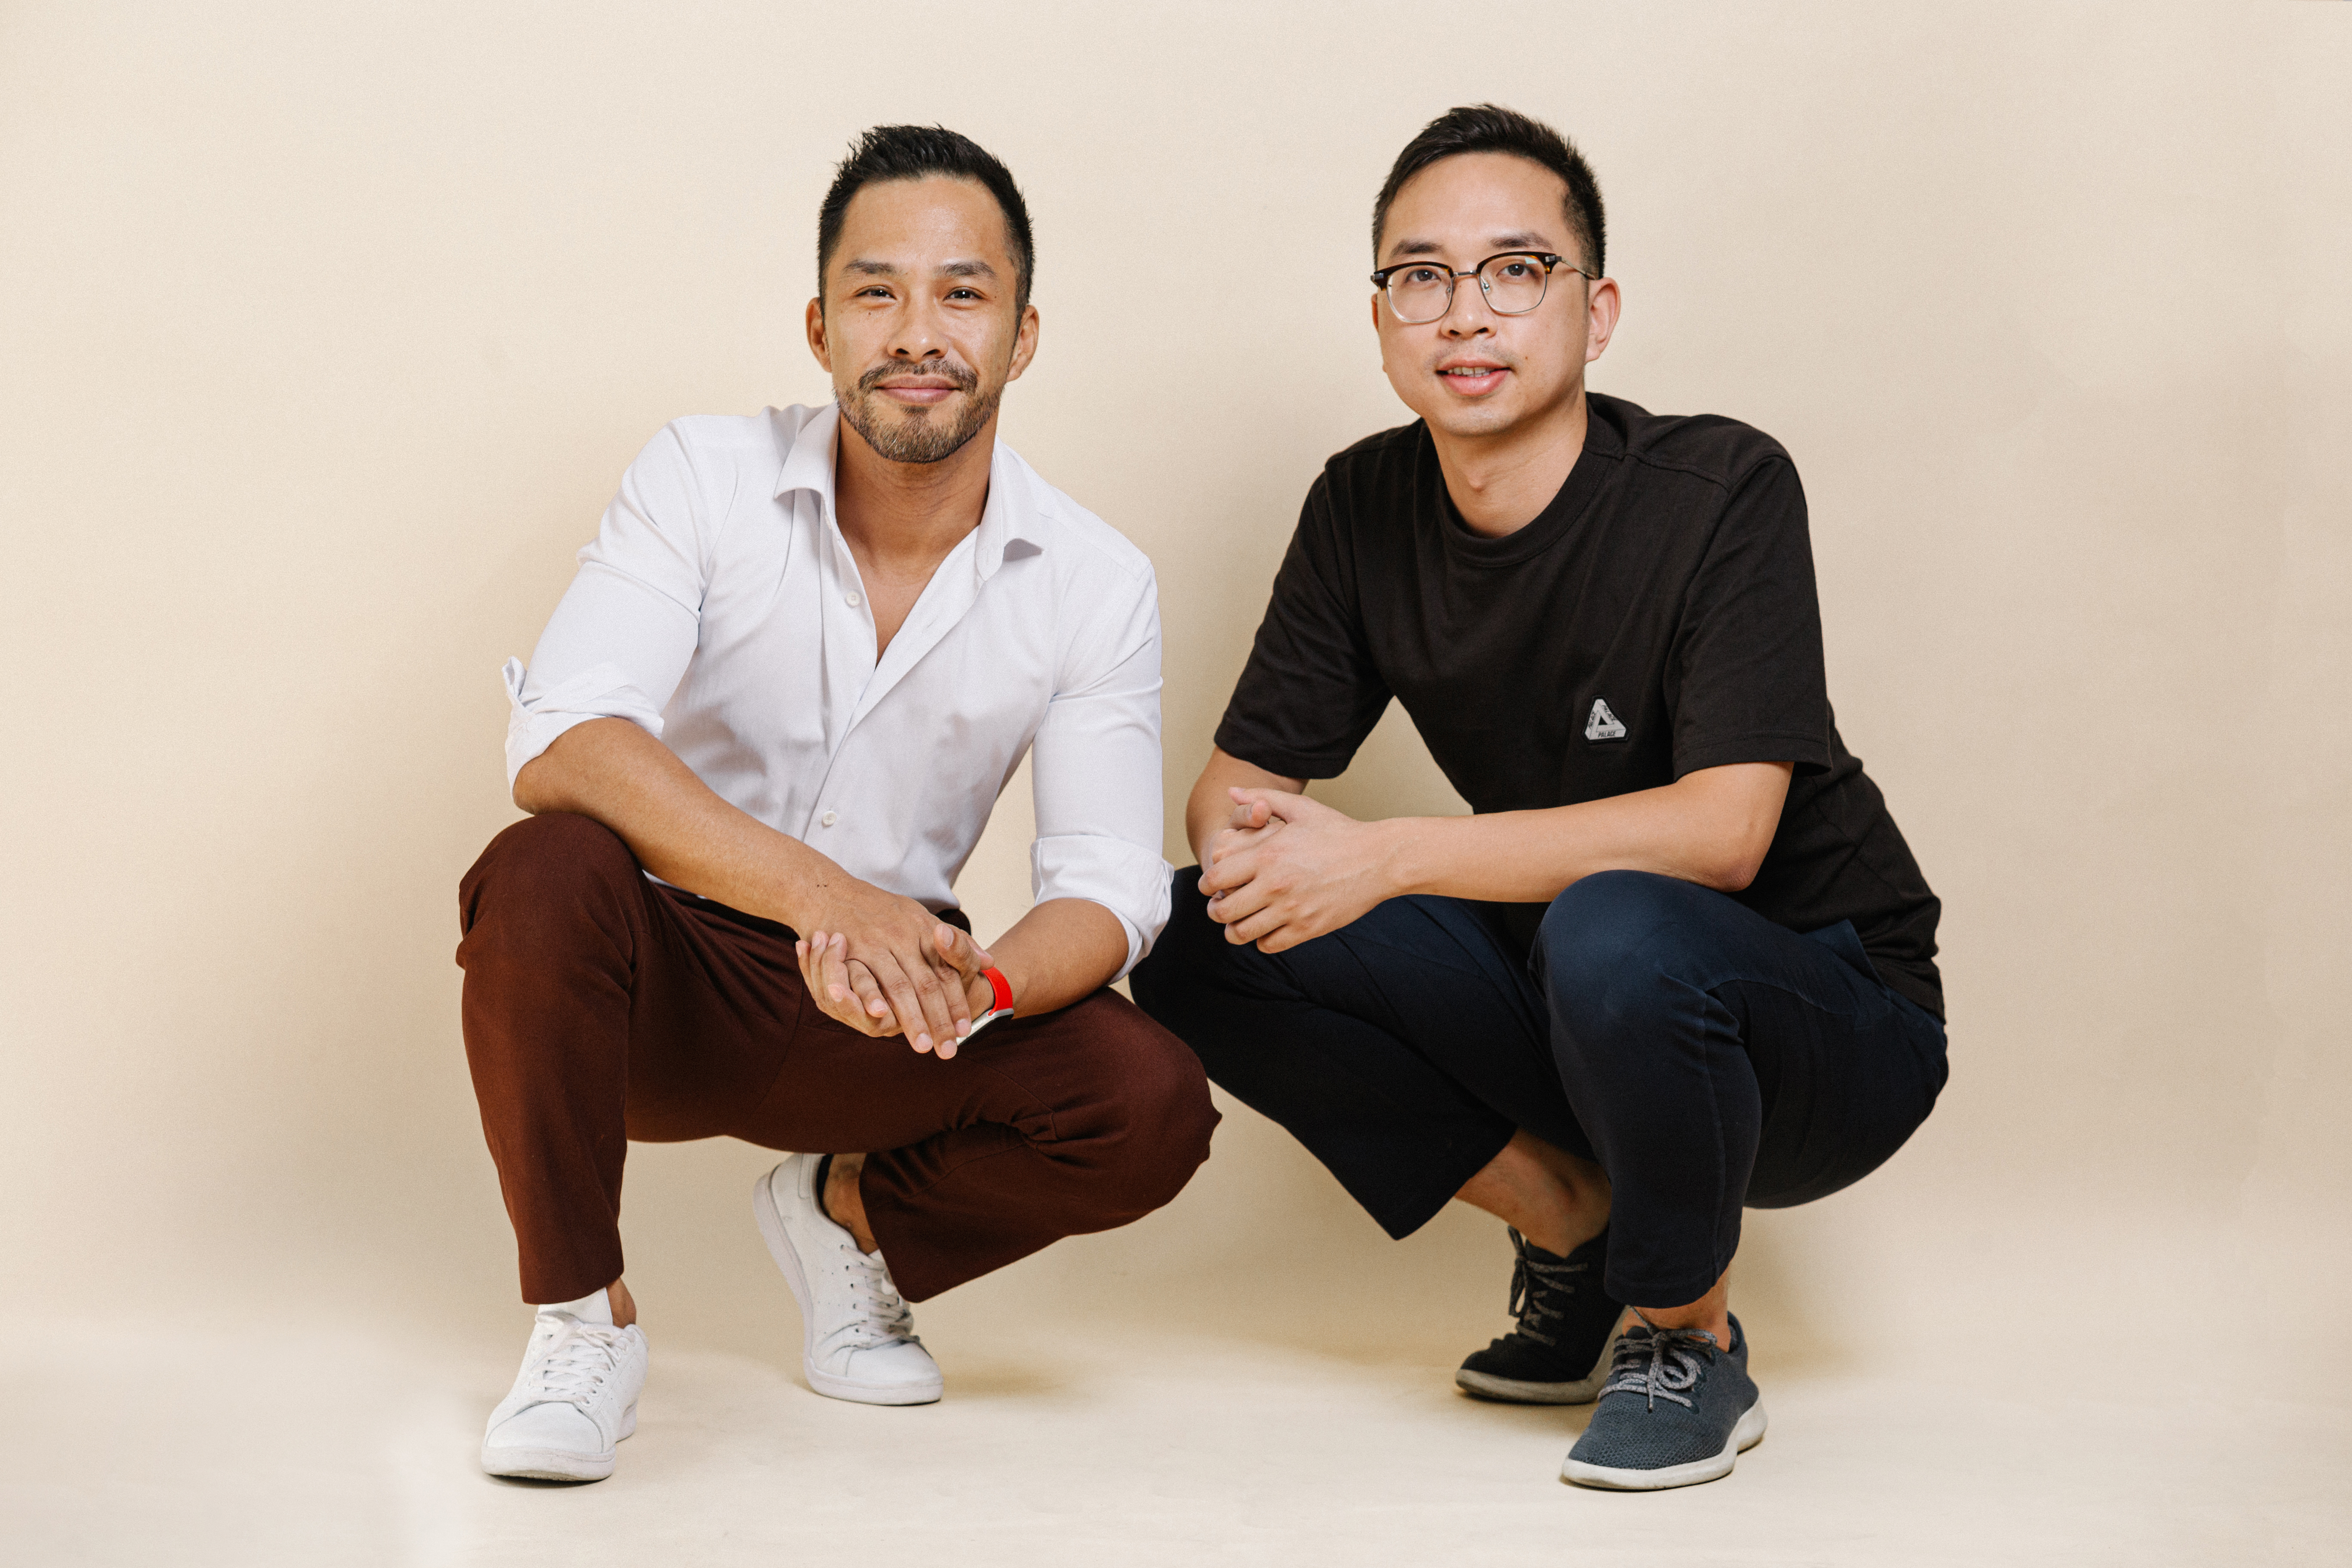 Vietnam Exclusive - Coffee with Founders: Hao Tran, CEO
